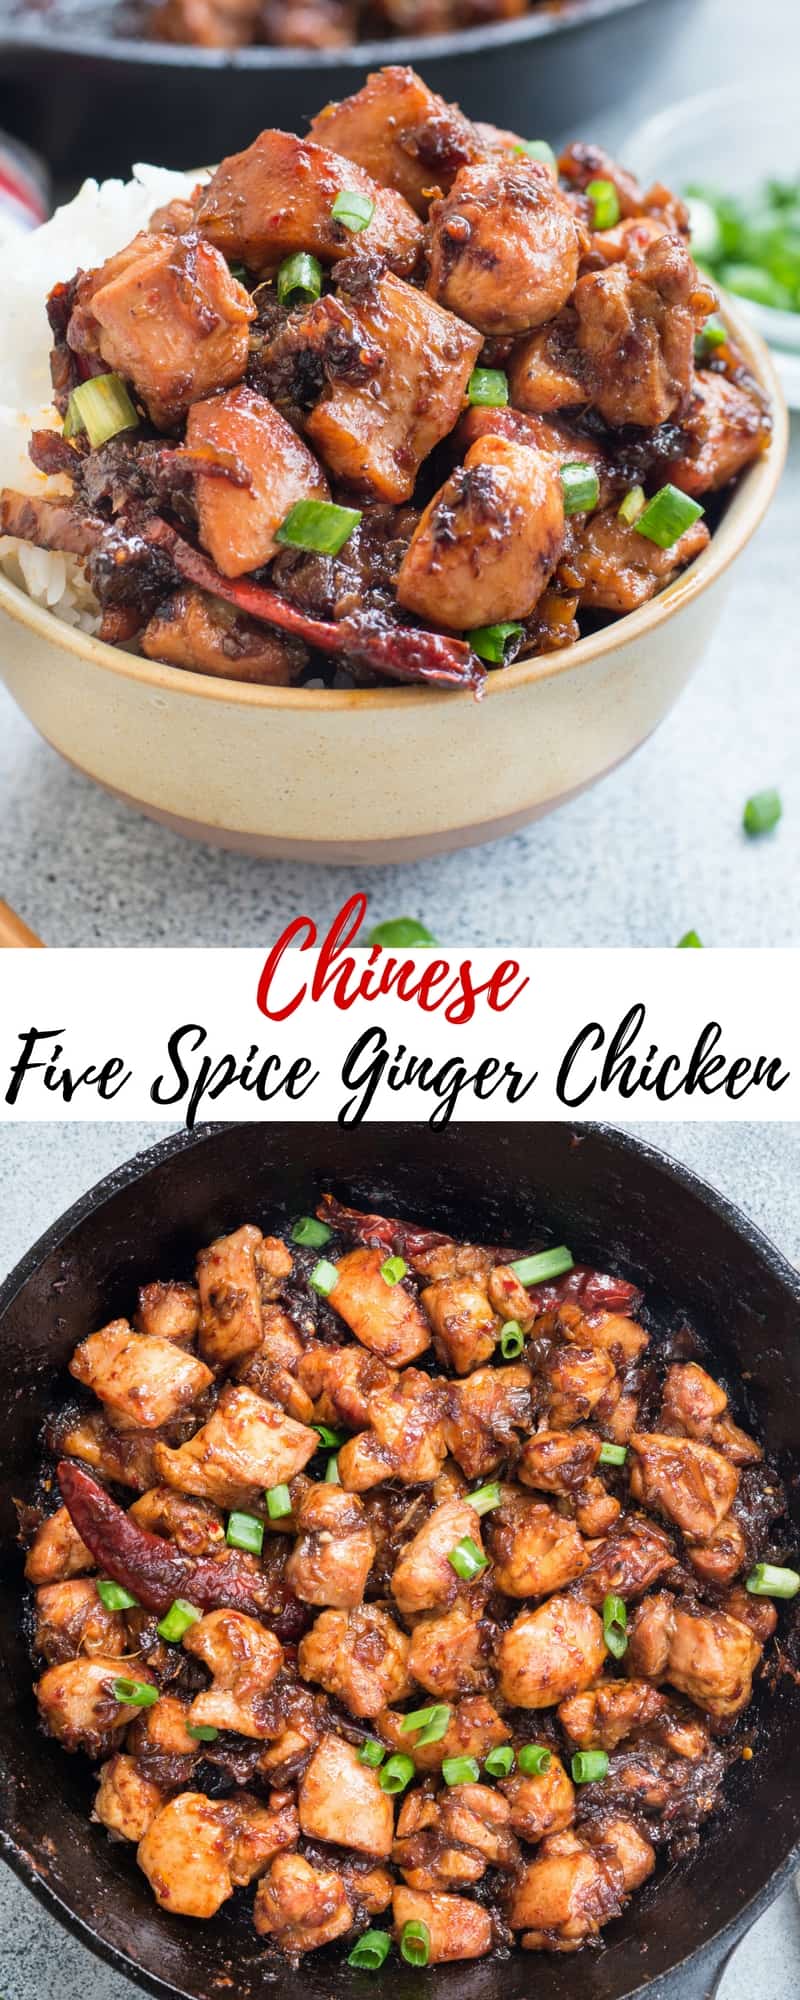 Chinese Five Spice Ginger Chicken - The flavours of kitchen